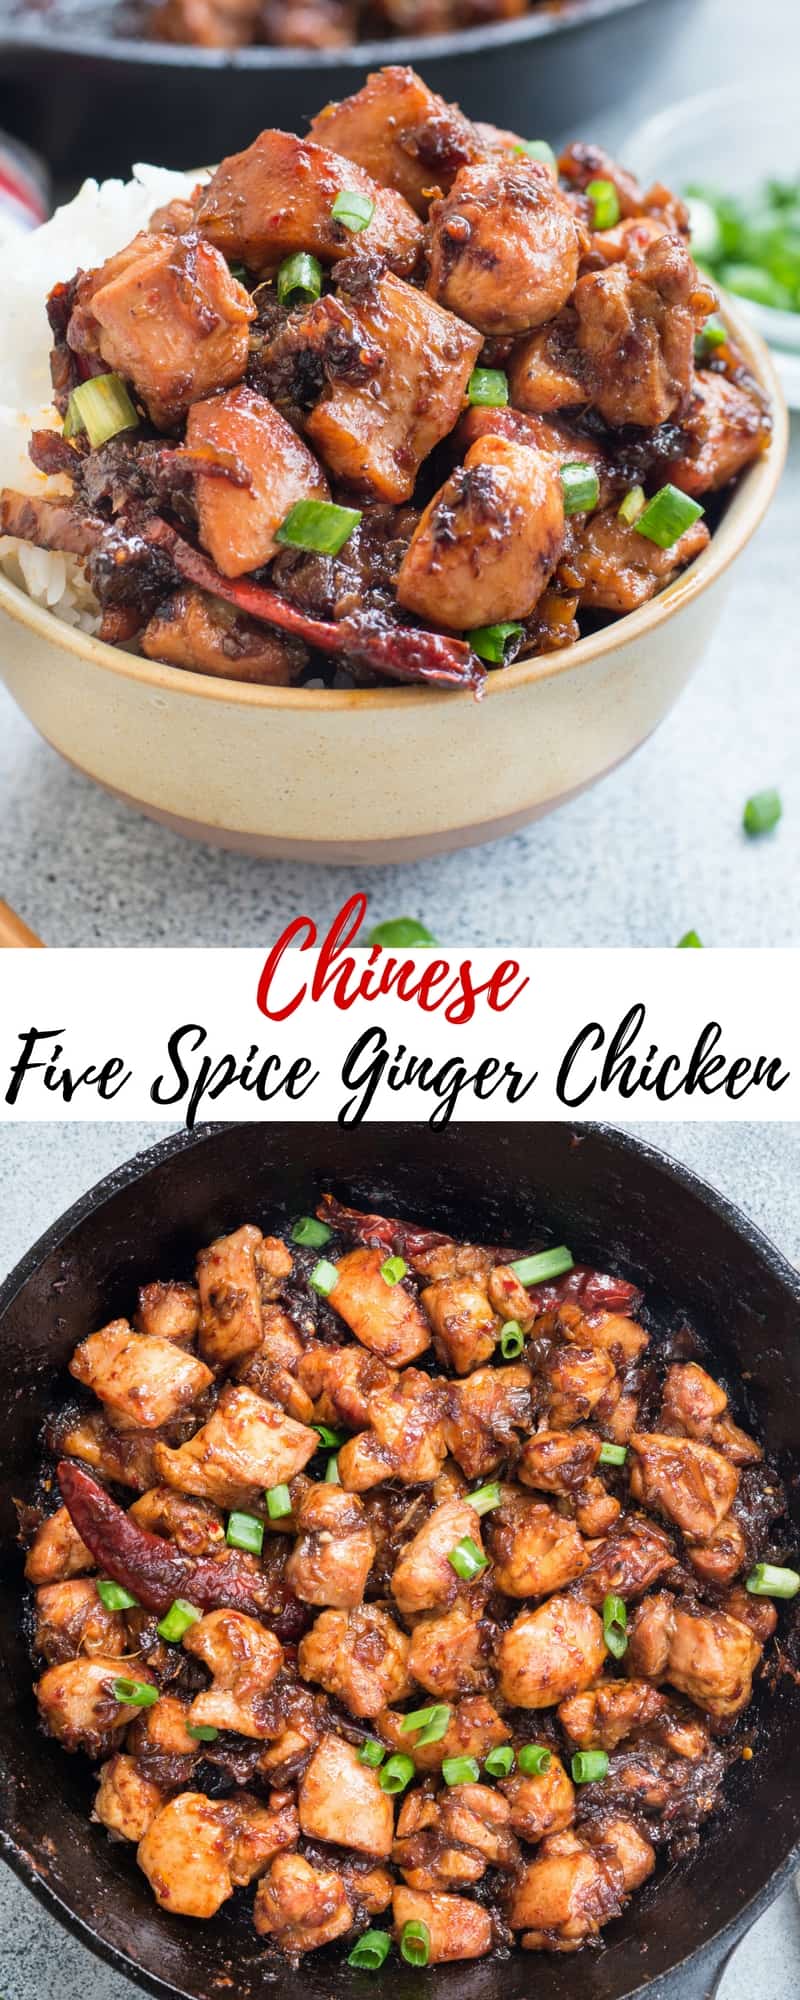 Chinese Five Spice Ginger Chicken - The flavours of kitchen